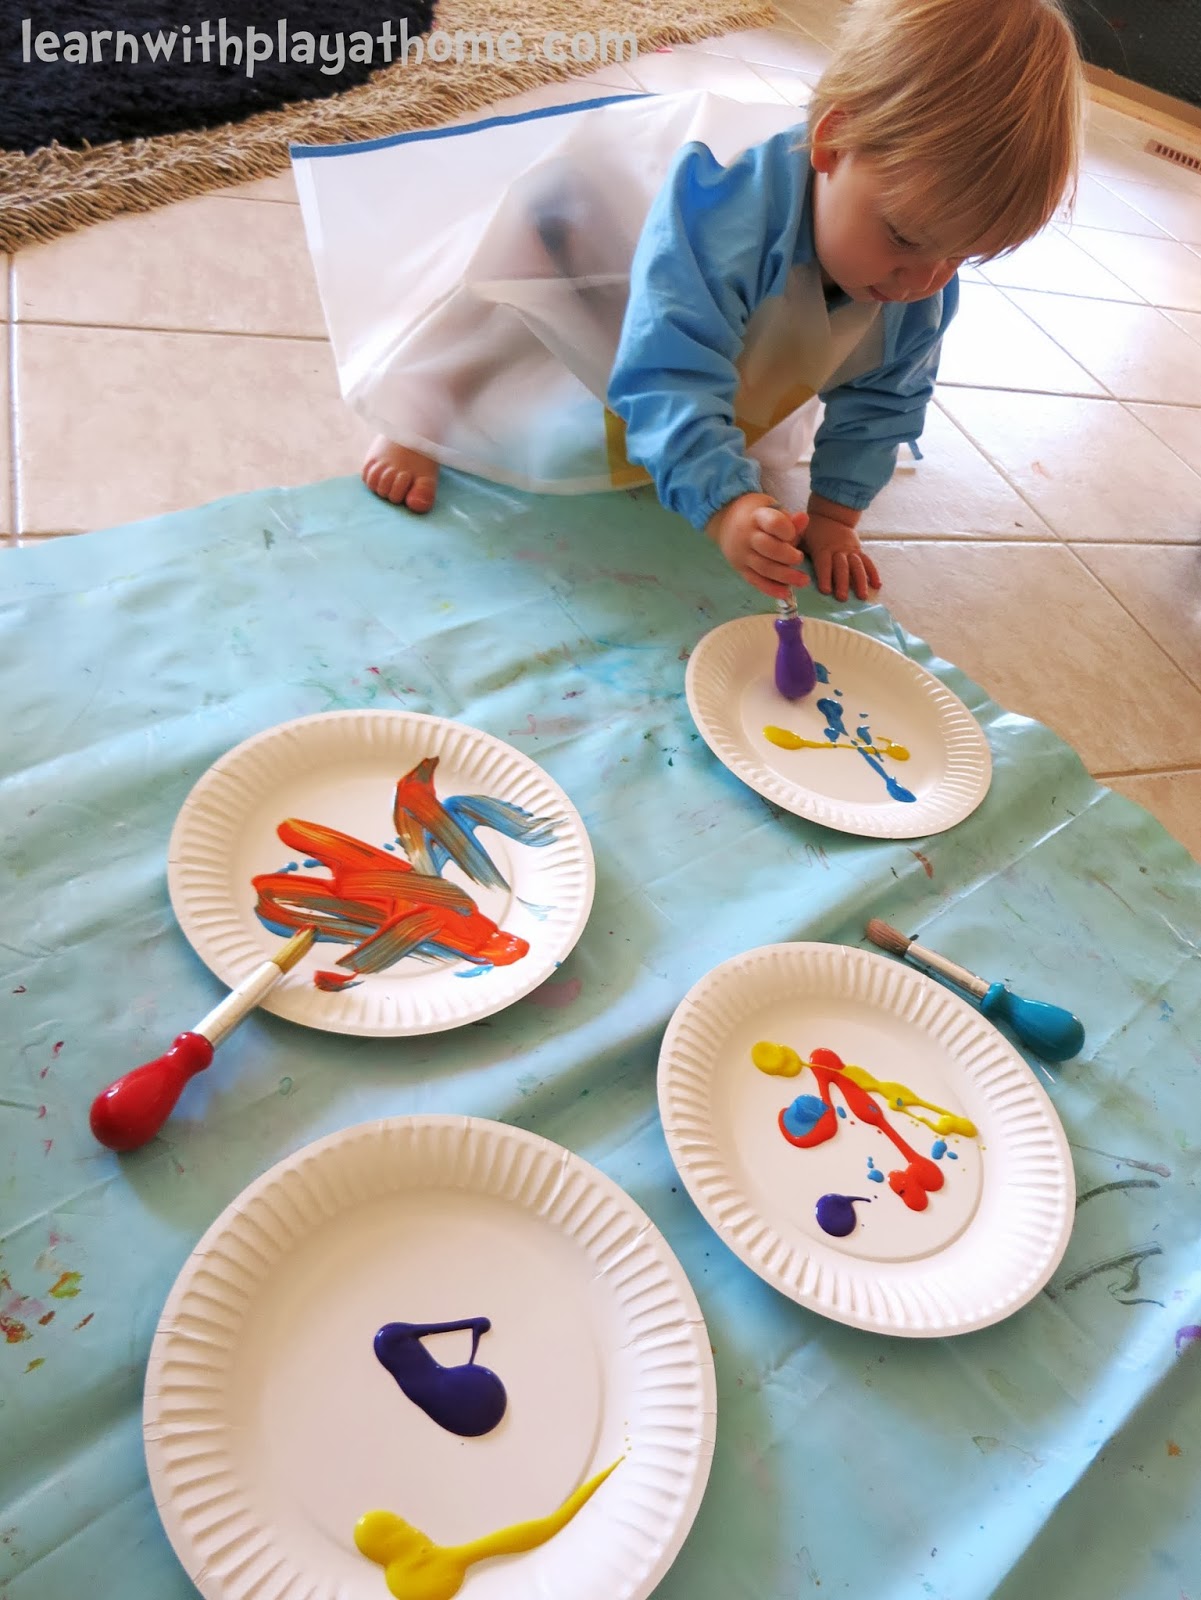 Learn with Play at Home: Baby and Toddler Play: Paper Plate Painting